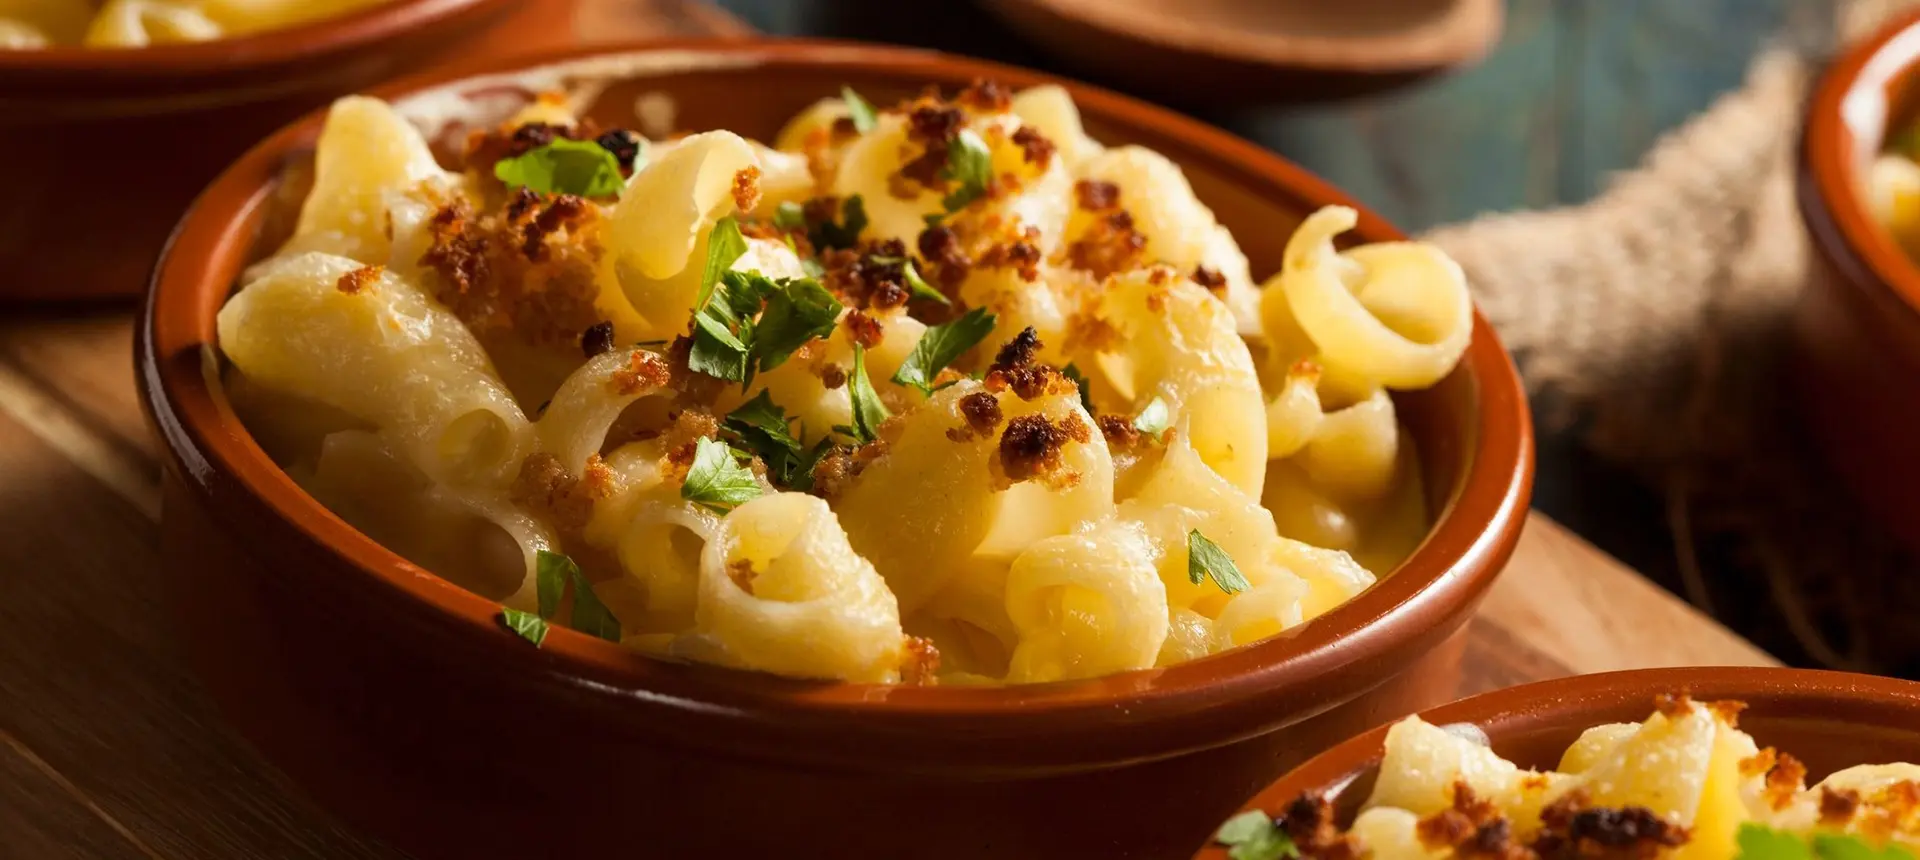 A bowl of macaroni and cheese with parsley.